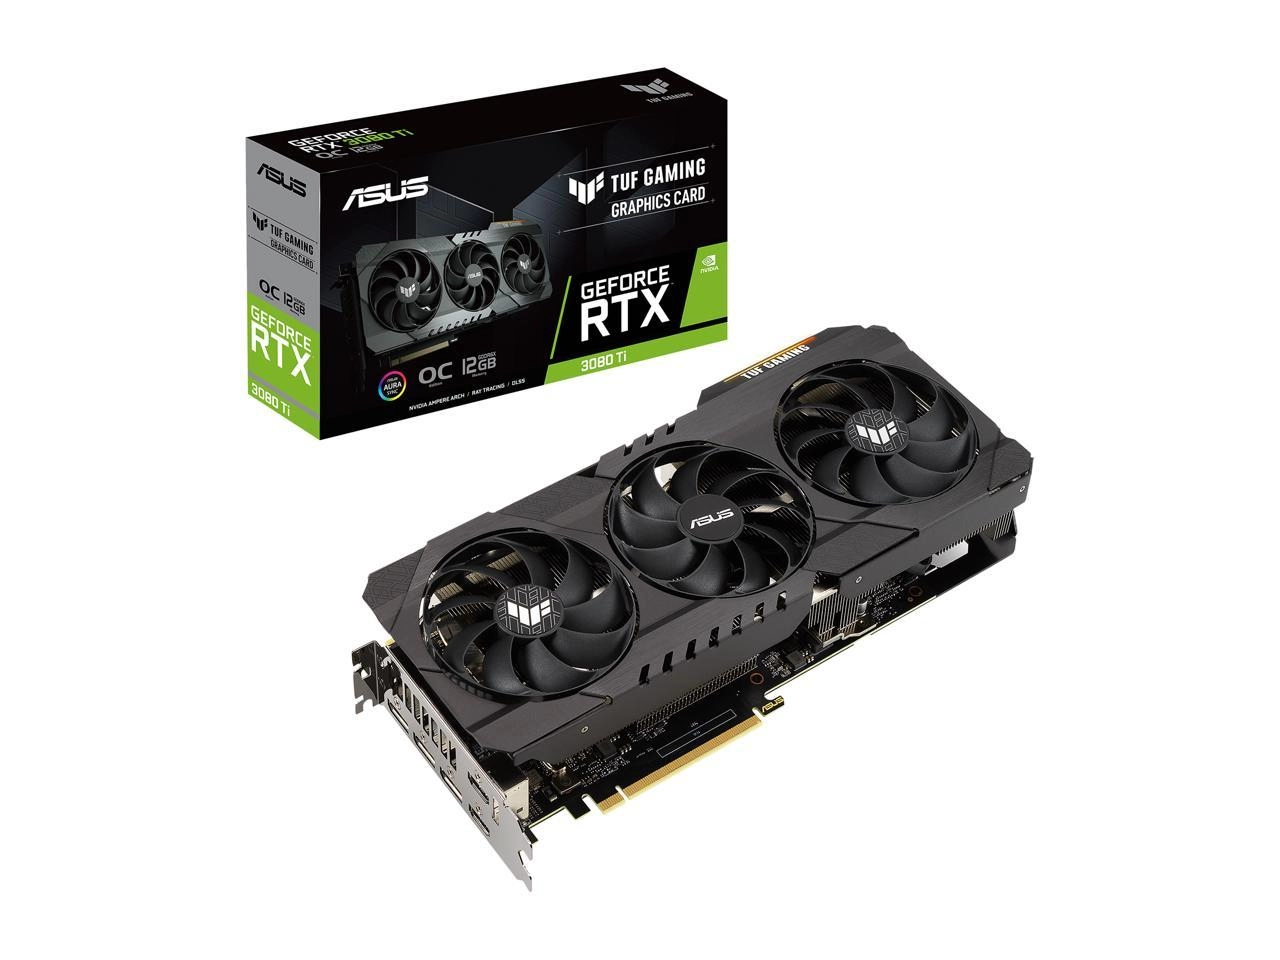 ASUS TUF Gaming GeForce RTX 3080 Ti OC Edition Package